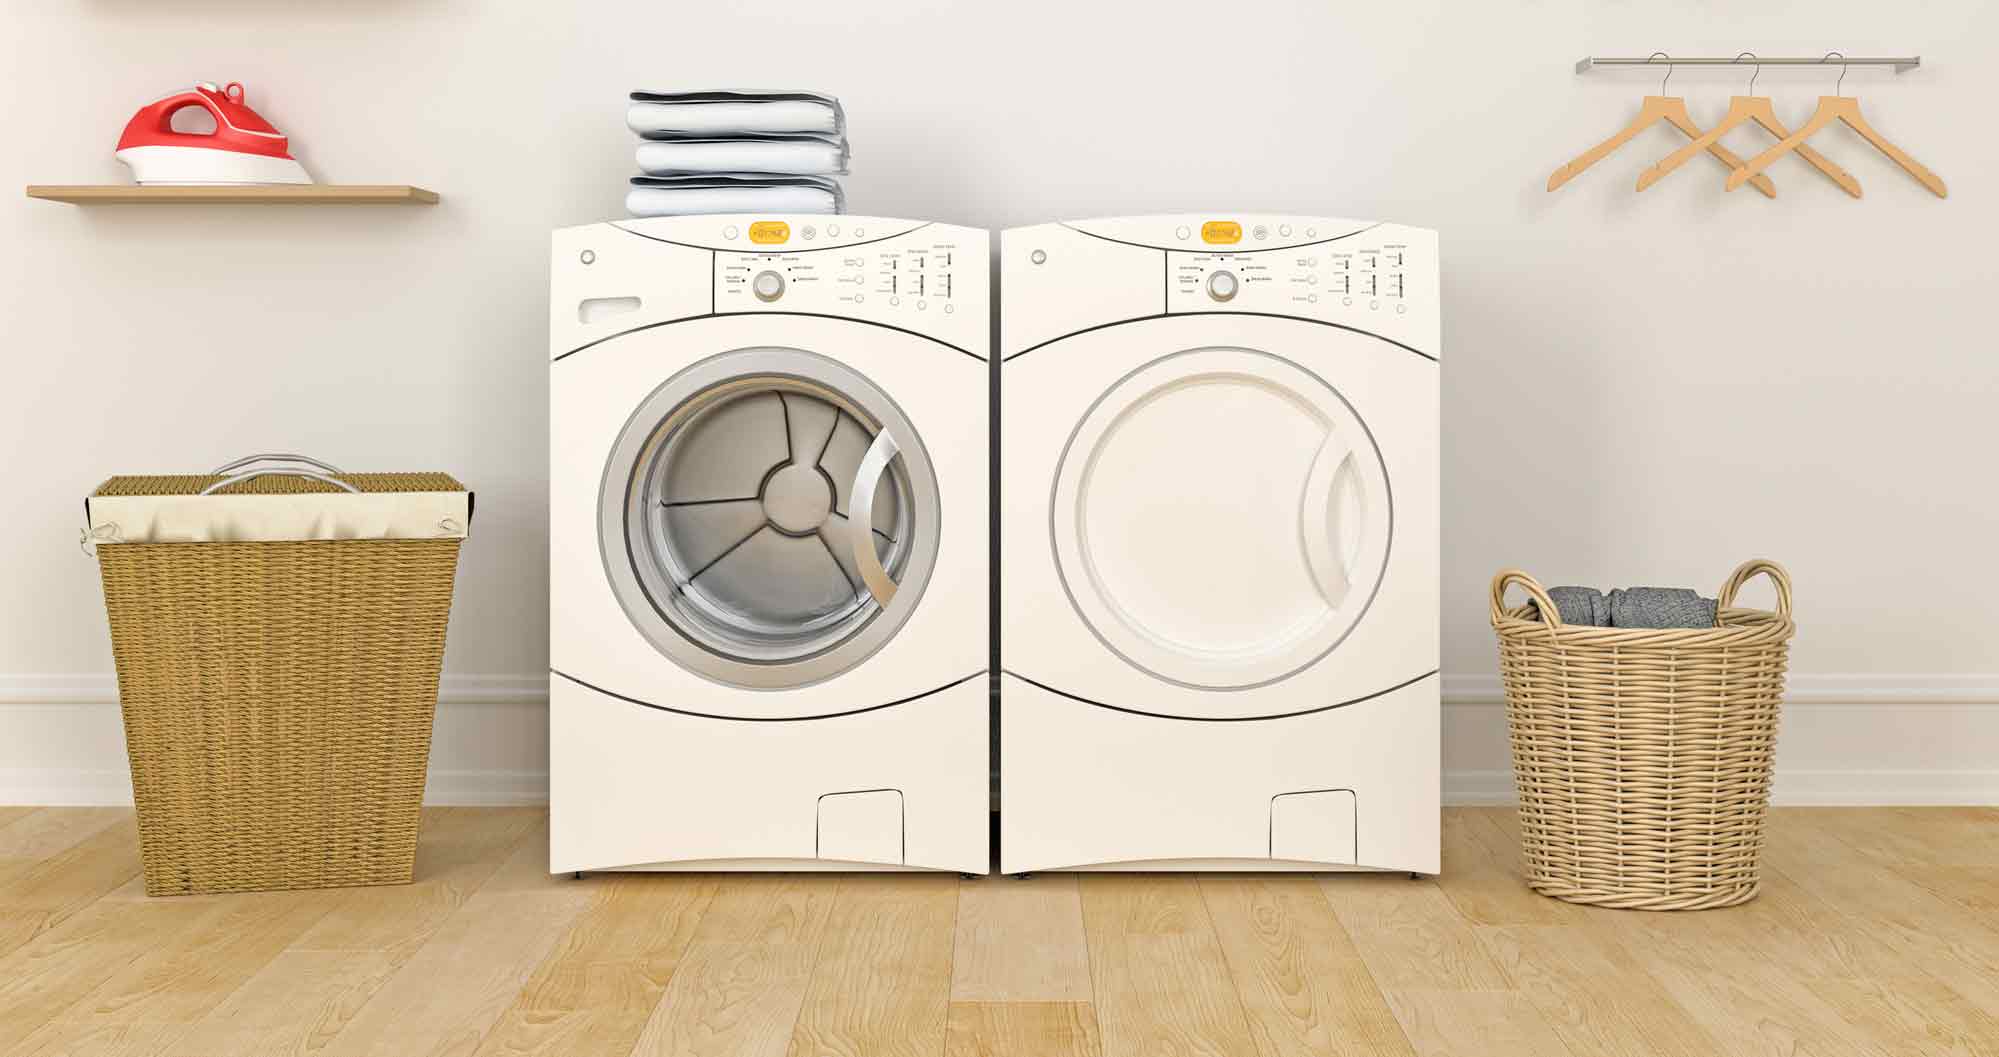 A washer and dryer in a room with wood floors.